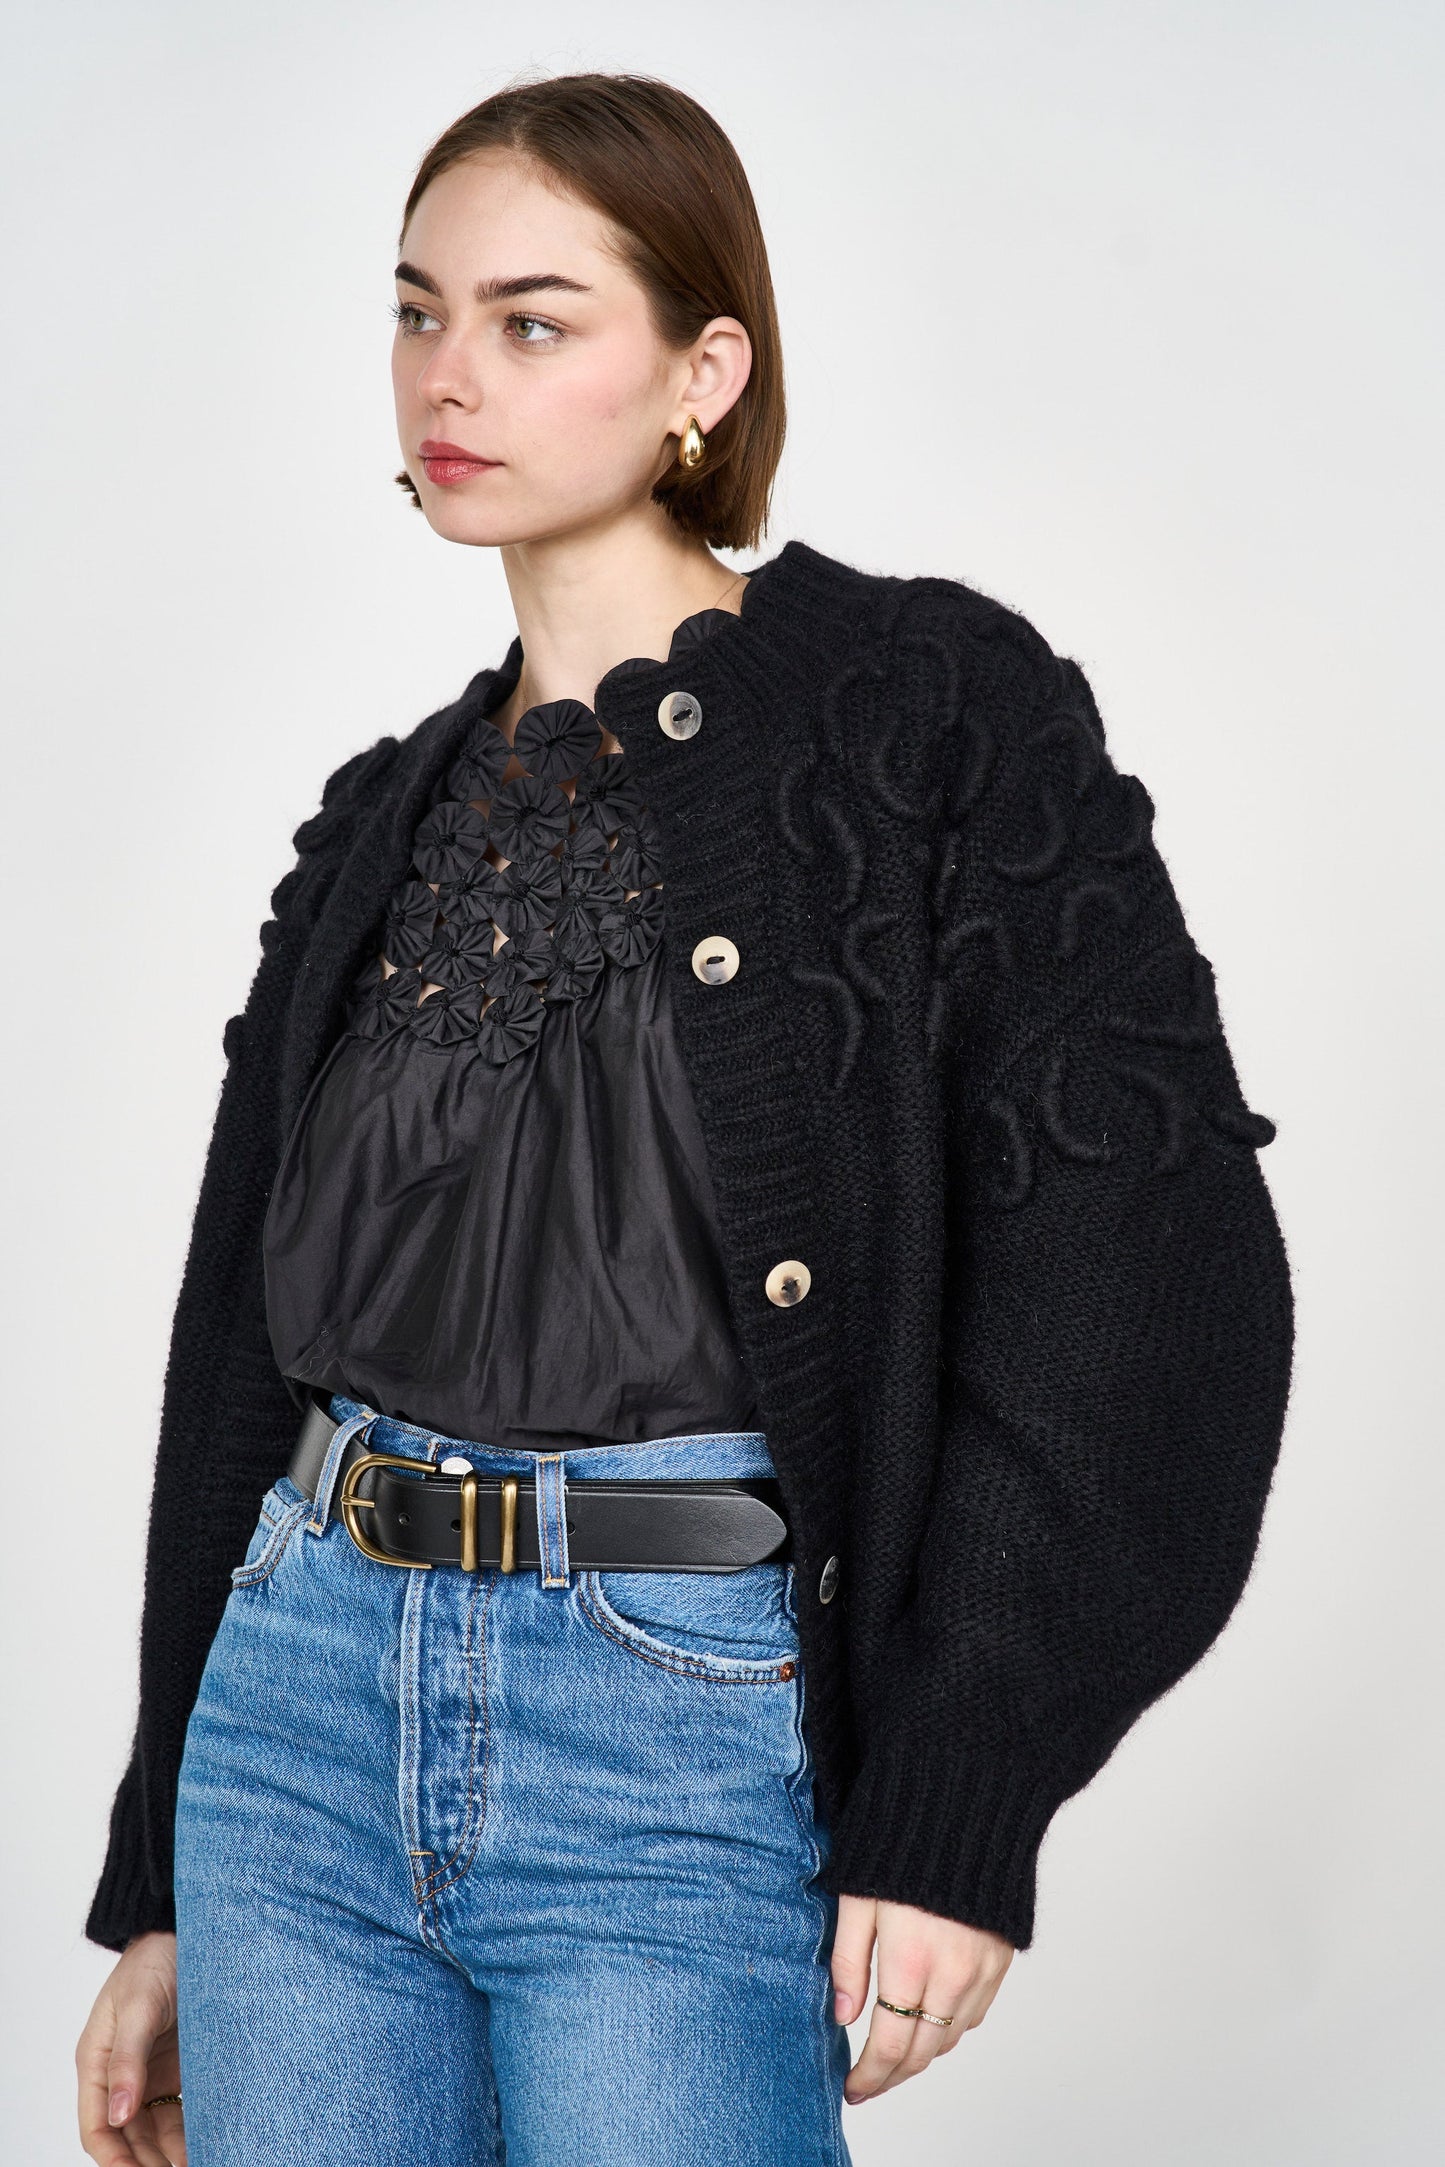 Mirth Cusco Cardigan in Black - A cozy winter cardigan featuring hand embroidered detailing on the shoulders. Designed to layer, this is the one we think your closet needs most. Handmade in India.